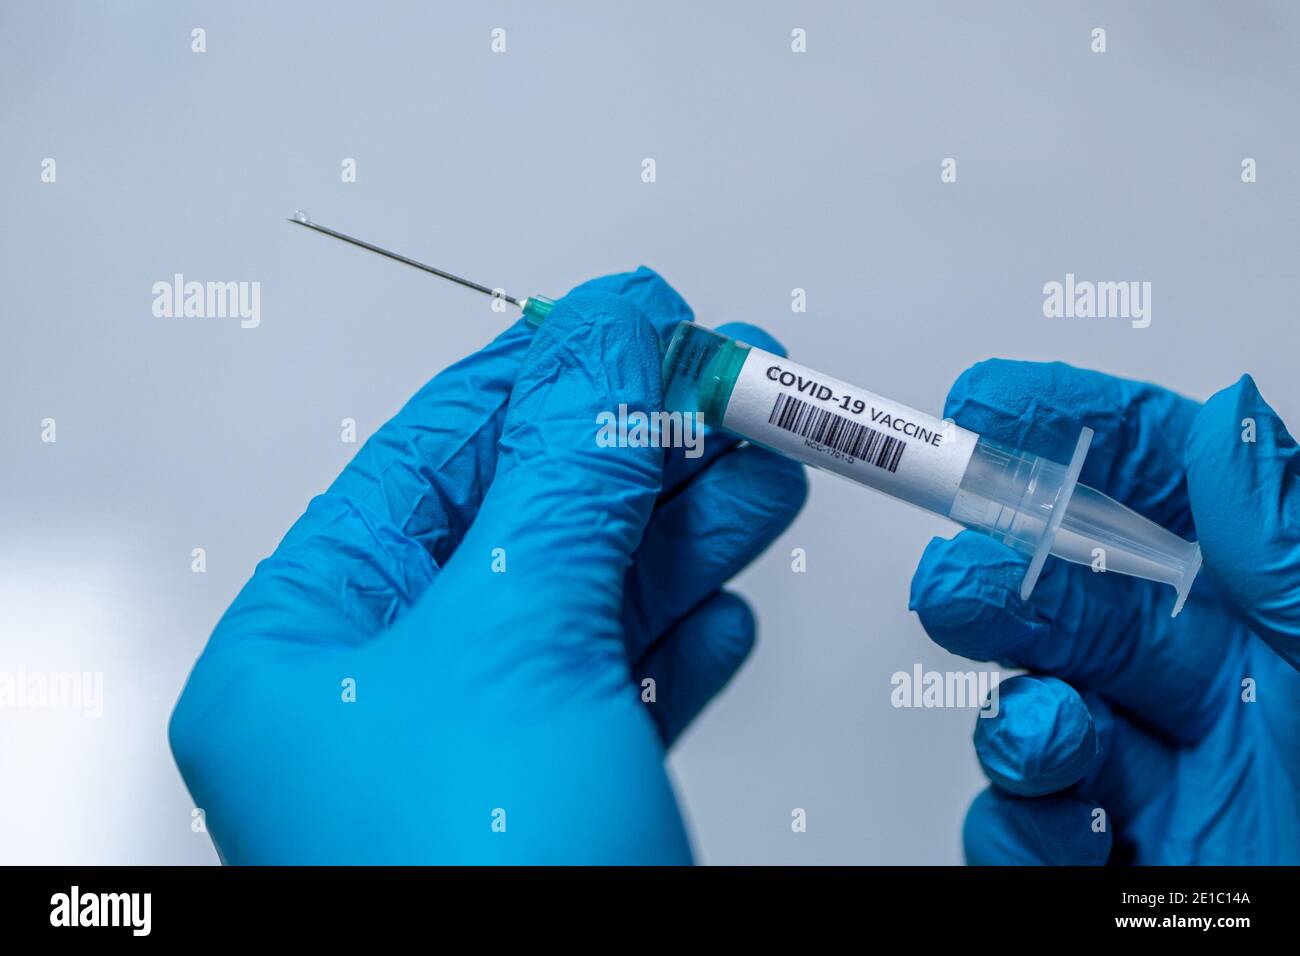 NIJMEGEN, NETHERLANDS - JANUARY 2: Corona vaccine / Covid-19 vaccine in a syringe being held by hands in blue surgical gloves. on January 2, 2021 in N Stock Photo